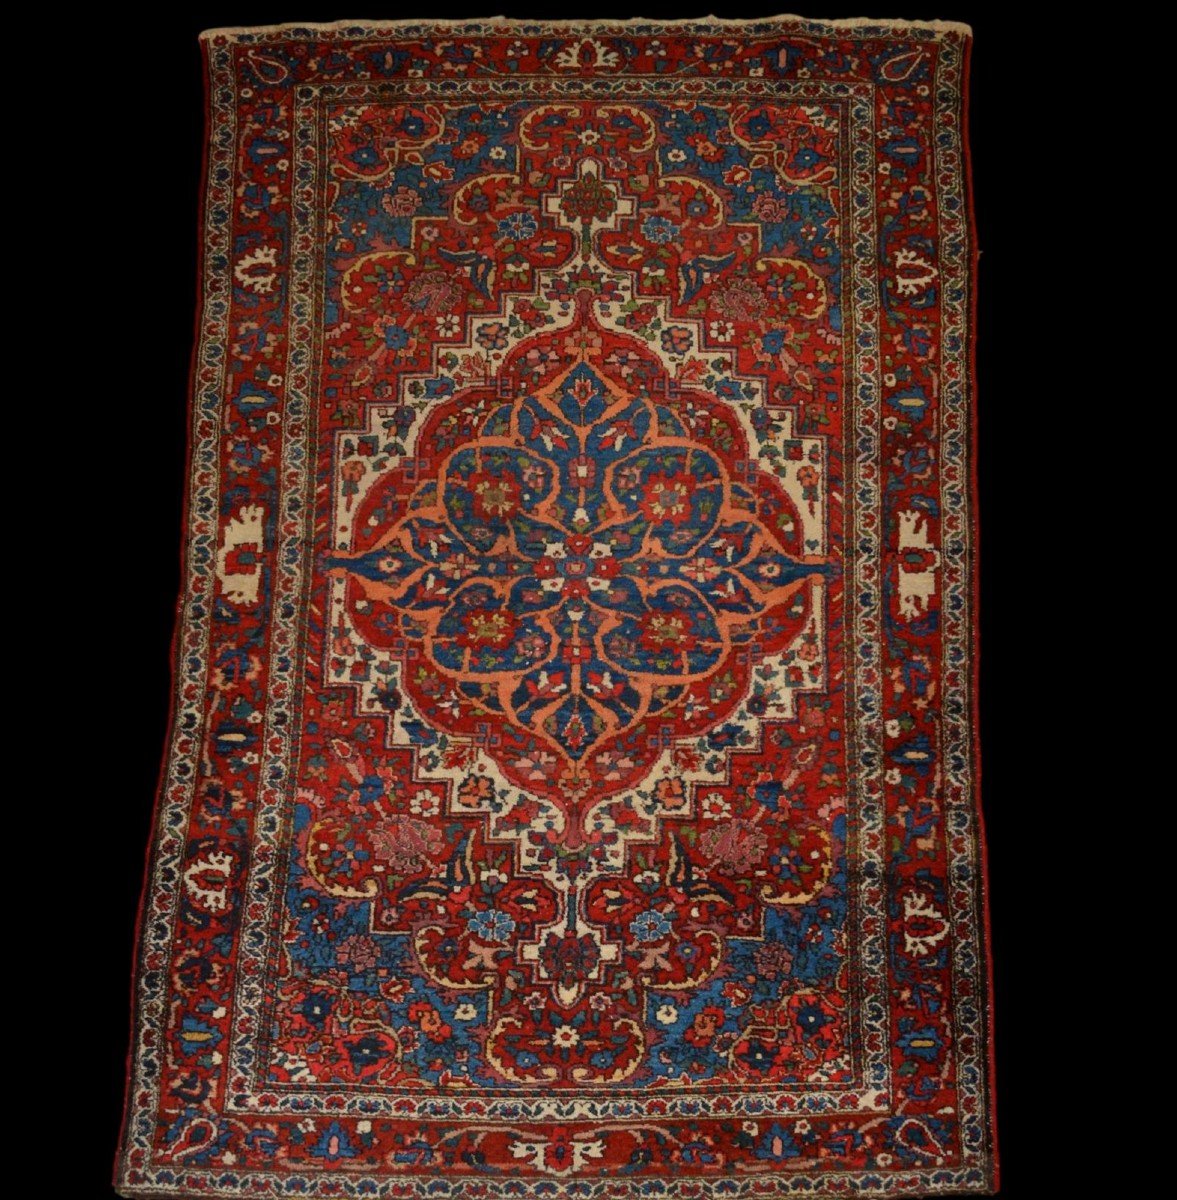 Antique Bakhtiar Rug, 133 X 207 Cm, Hand-knotted Wool In Iran, First Part Of The 20th Century